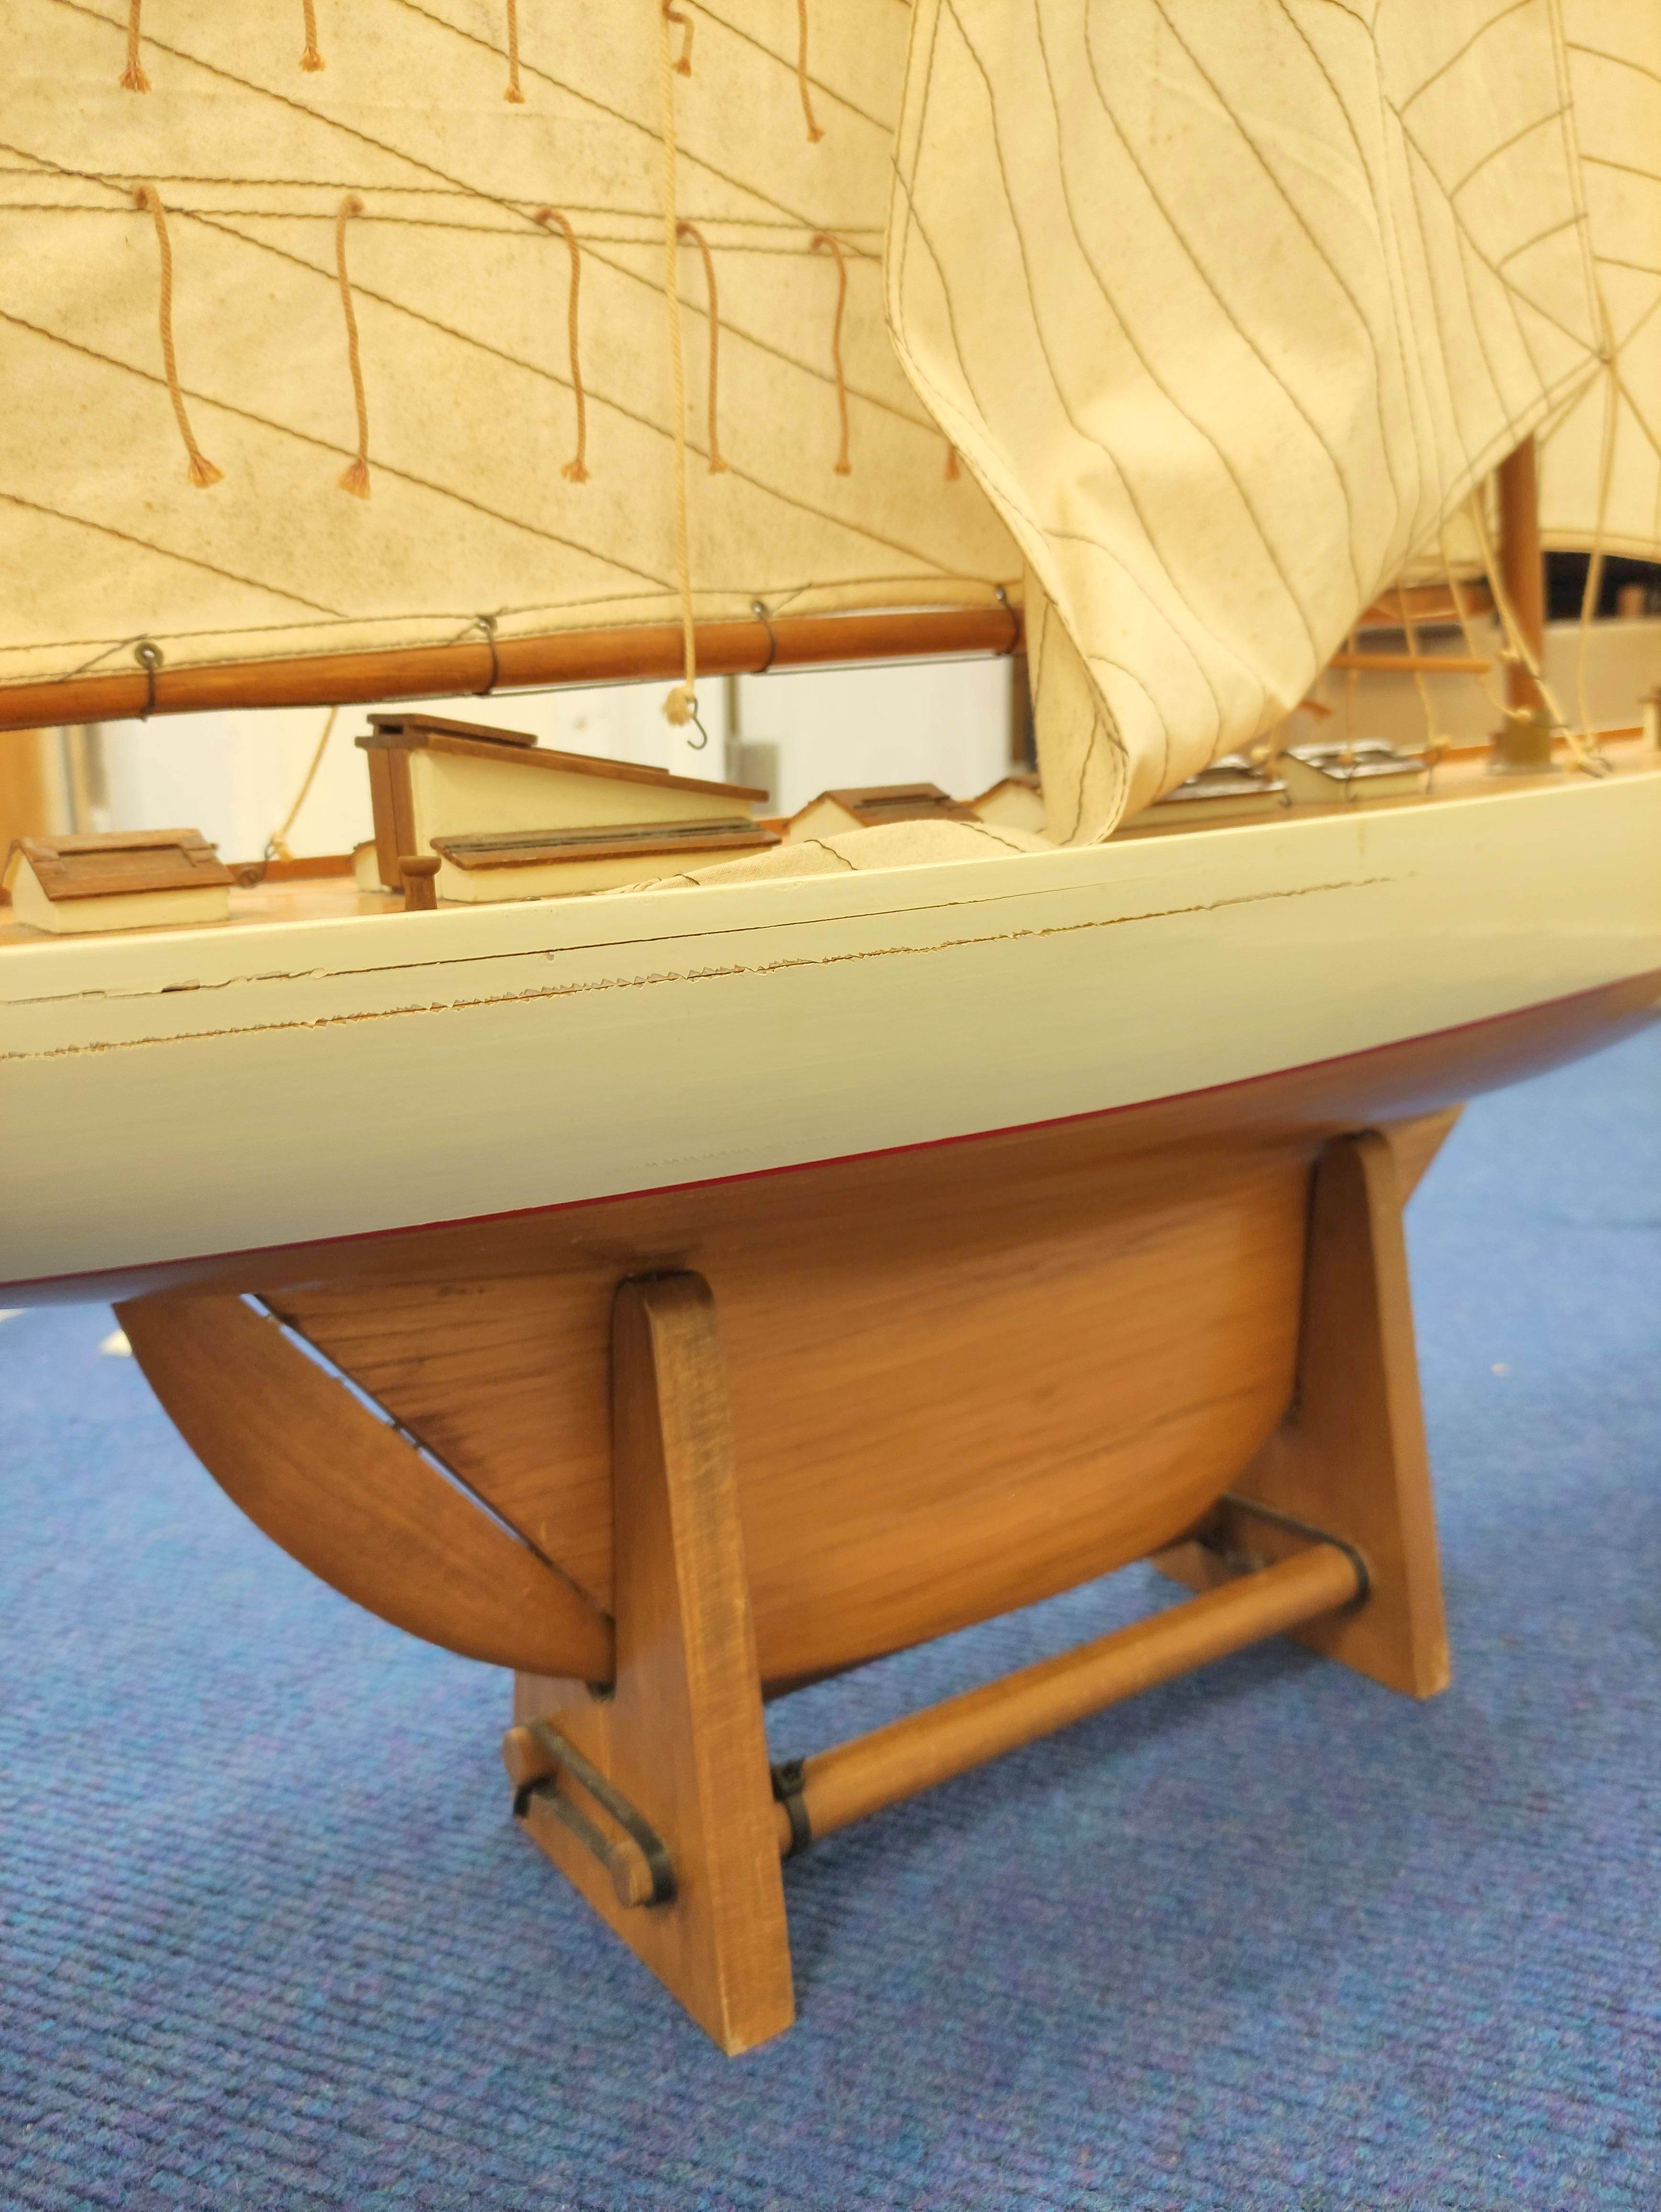 Large model sailing ship by Nauticalia of London with wooden hull and canvas sails. - Image 5 of 6